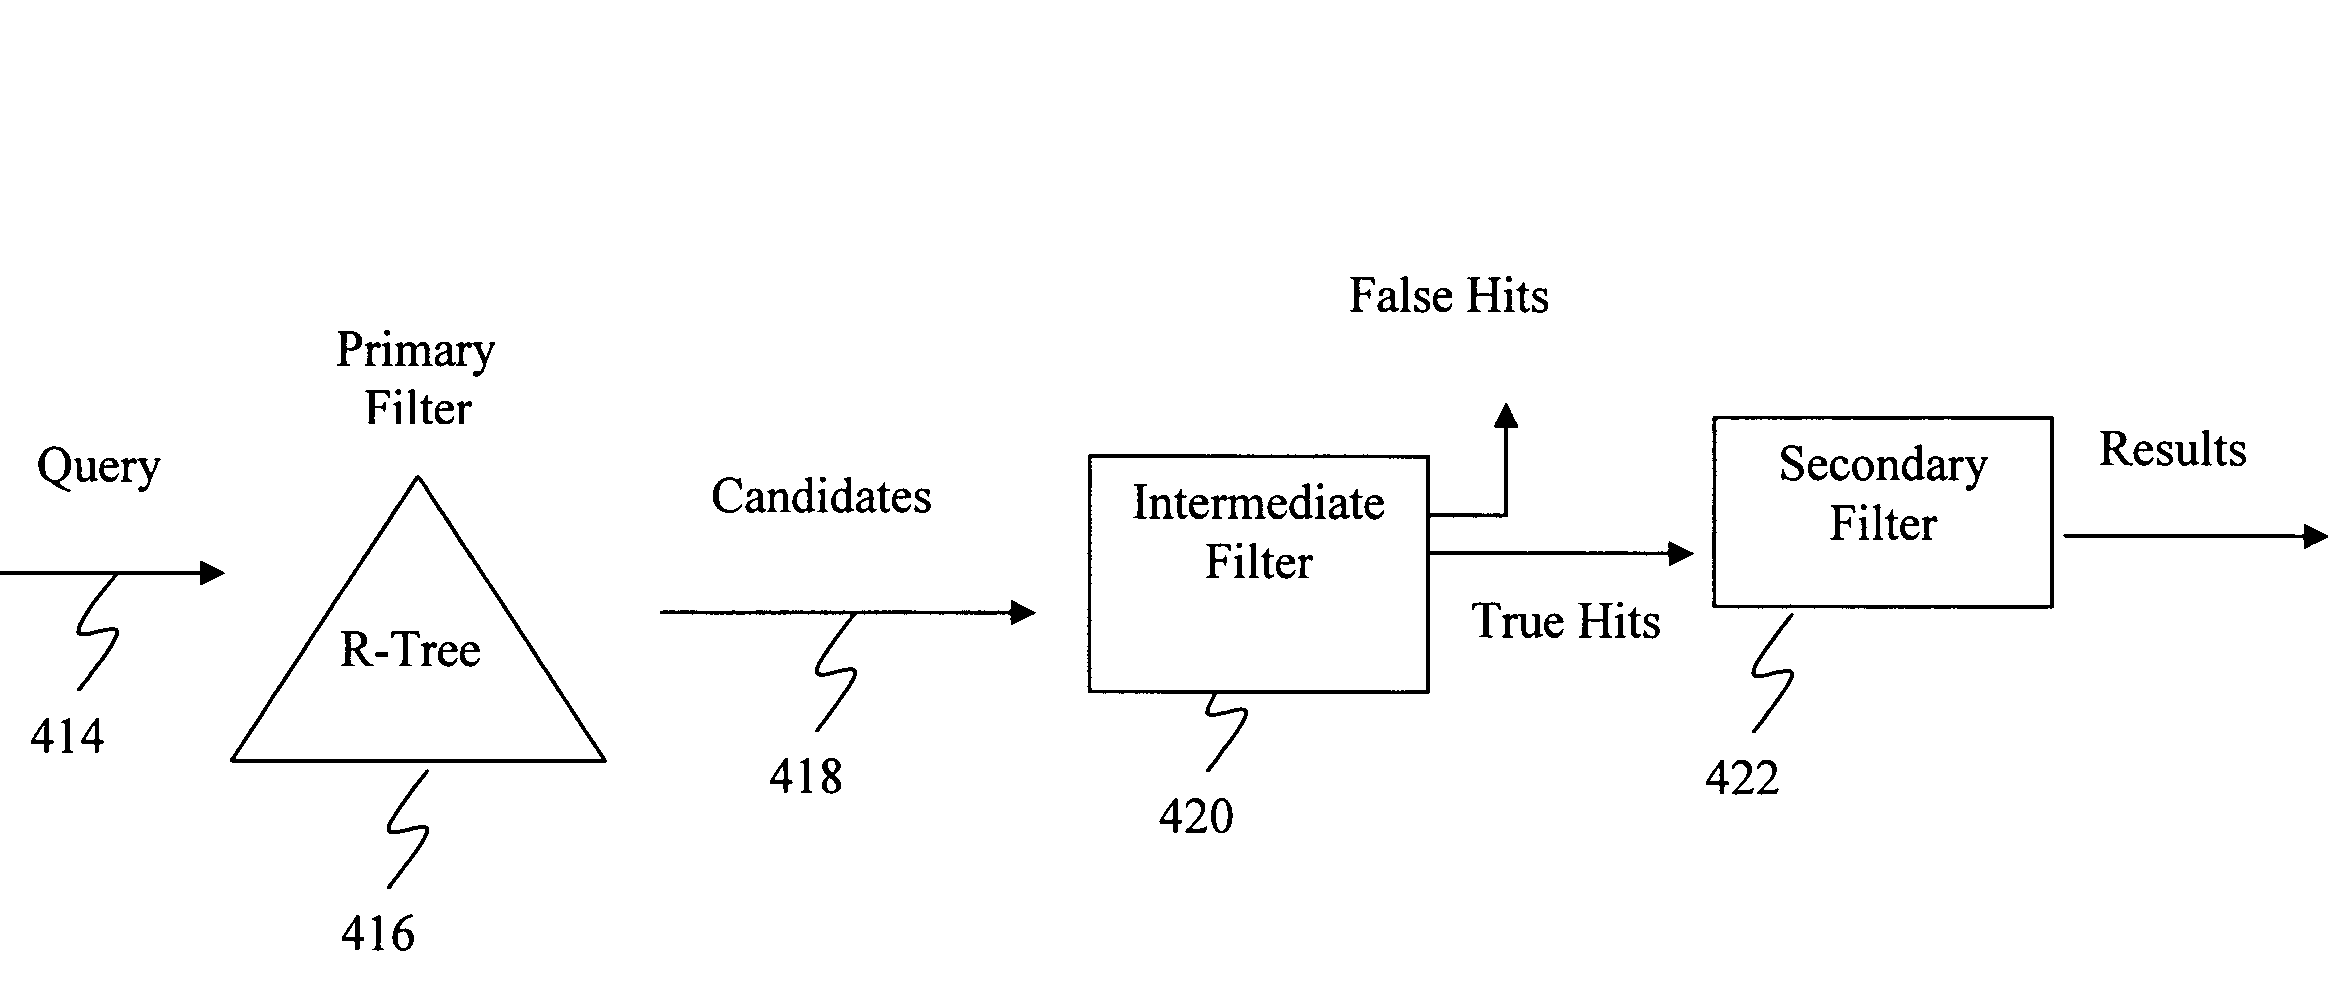 Query prunning using exterior tiles in an R-tree index